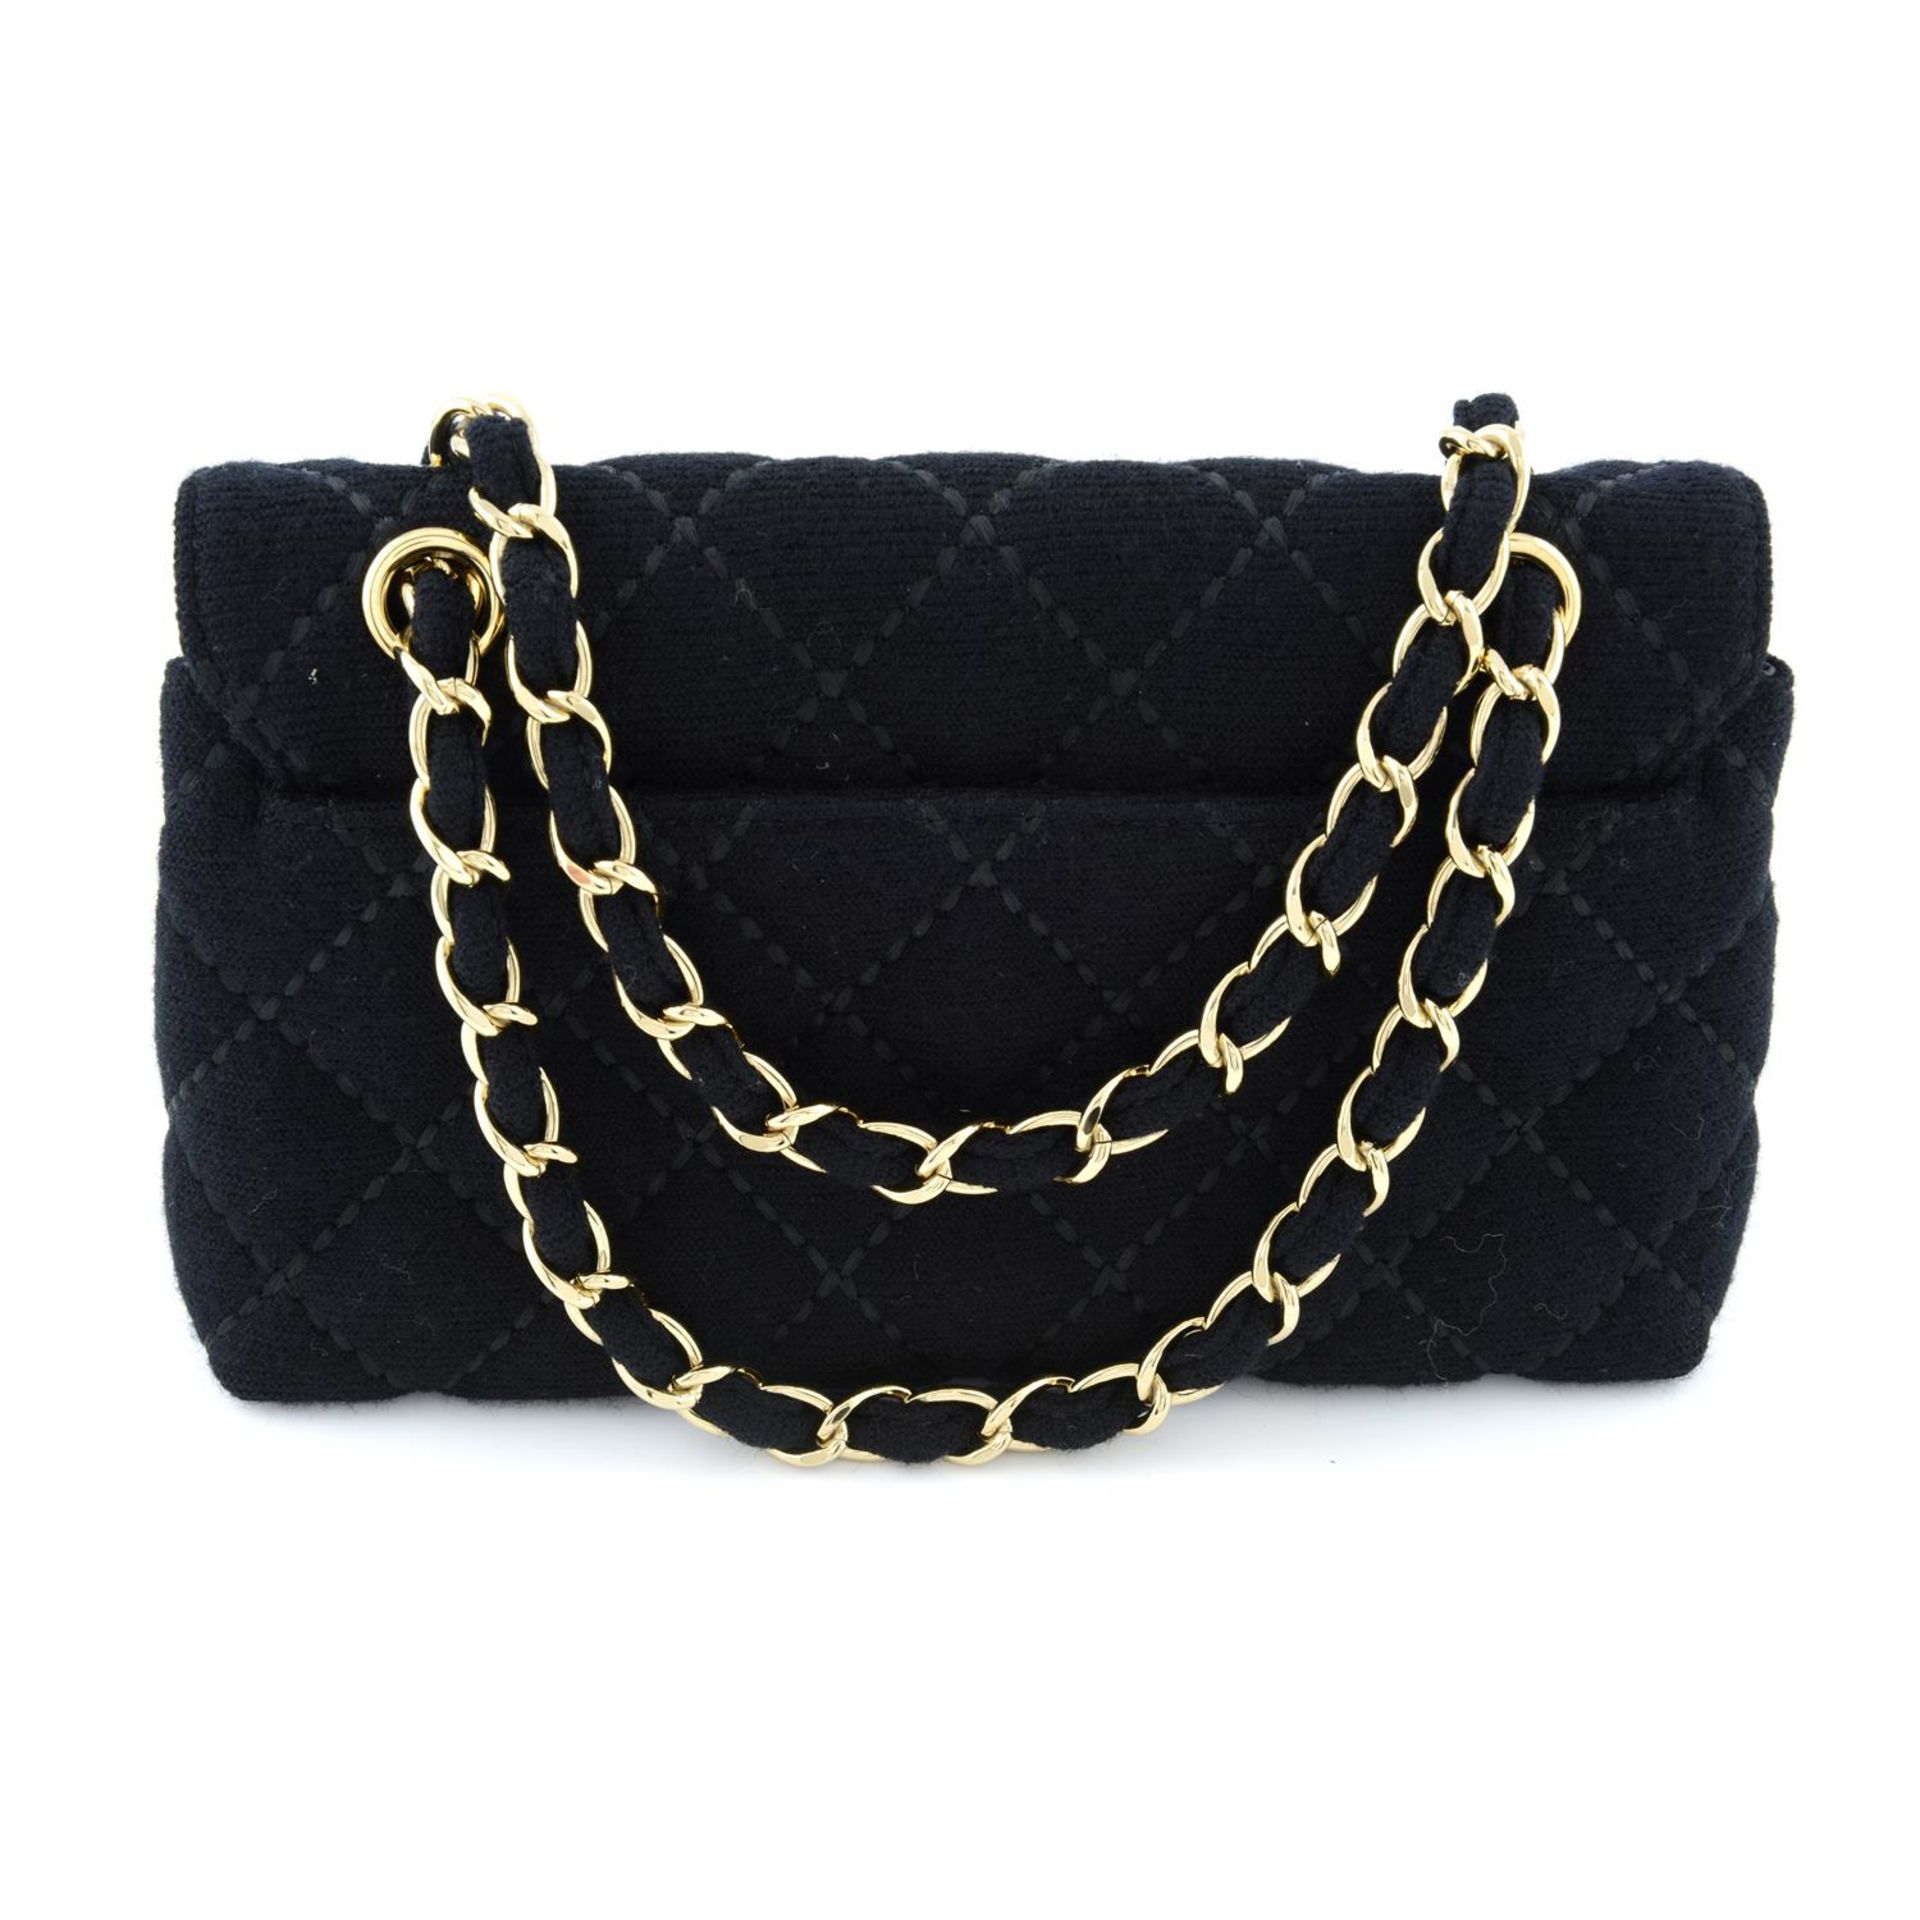 CHANEL - a 2003 single flap fabric bag. - Image 2 of 5